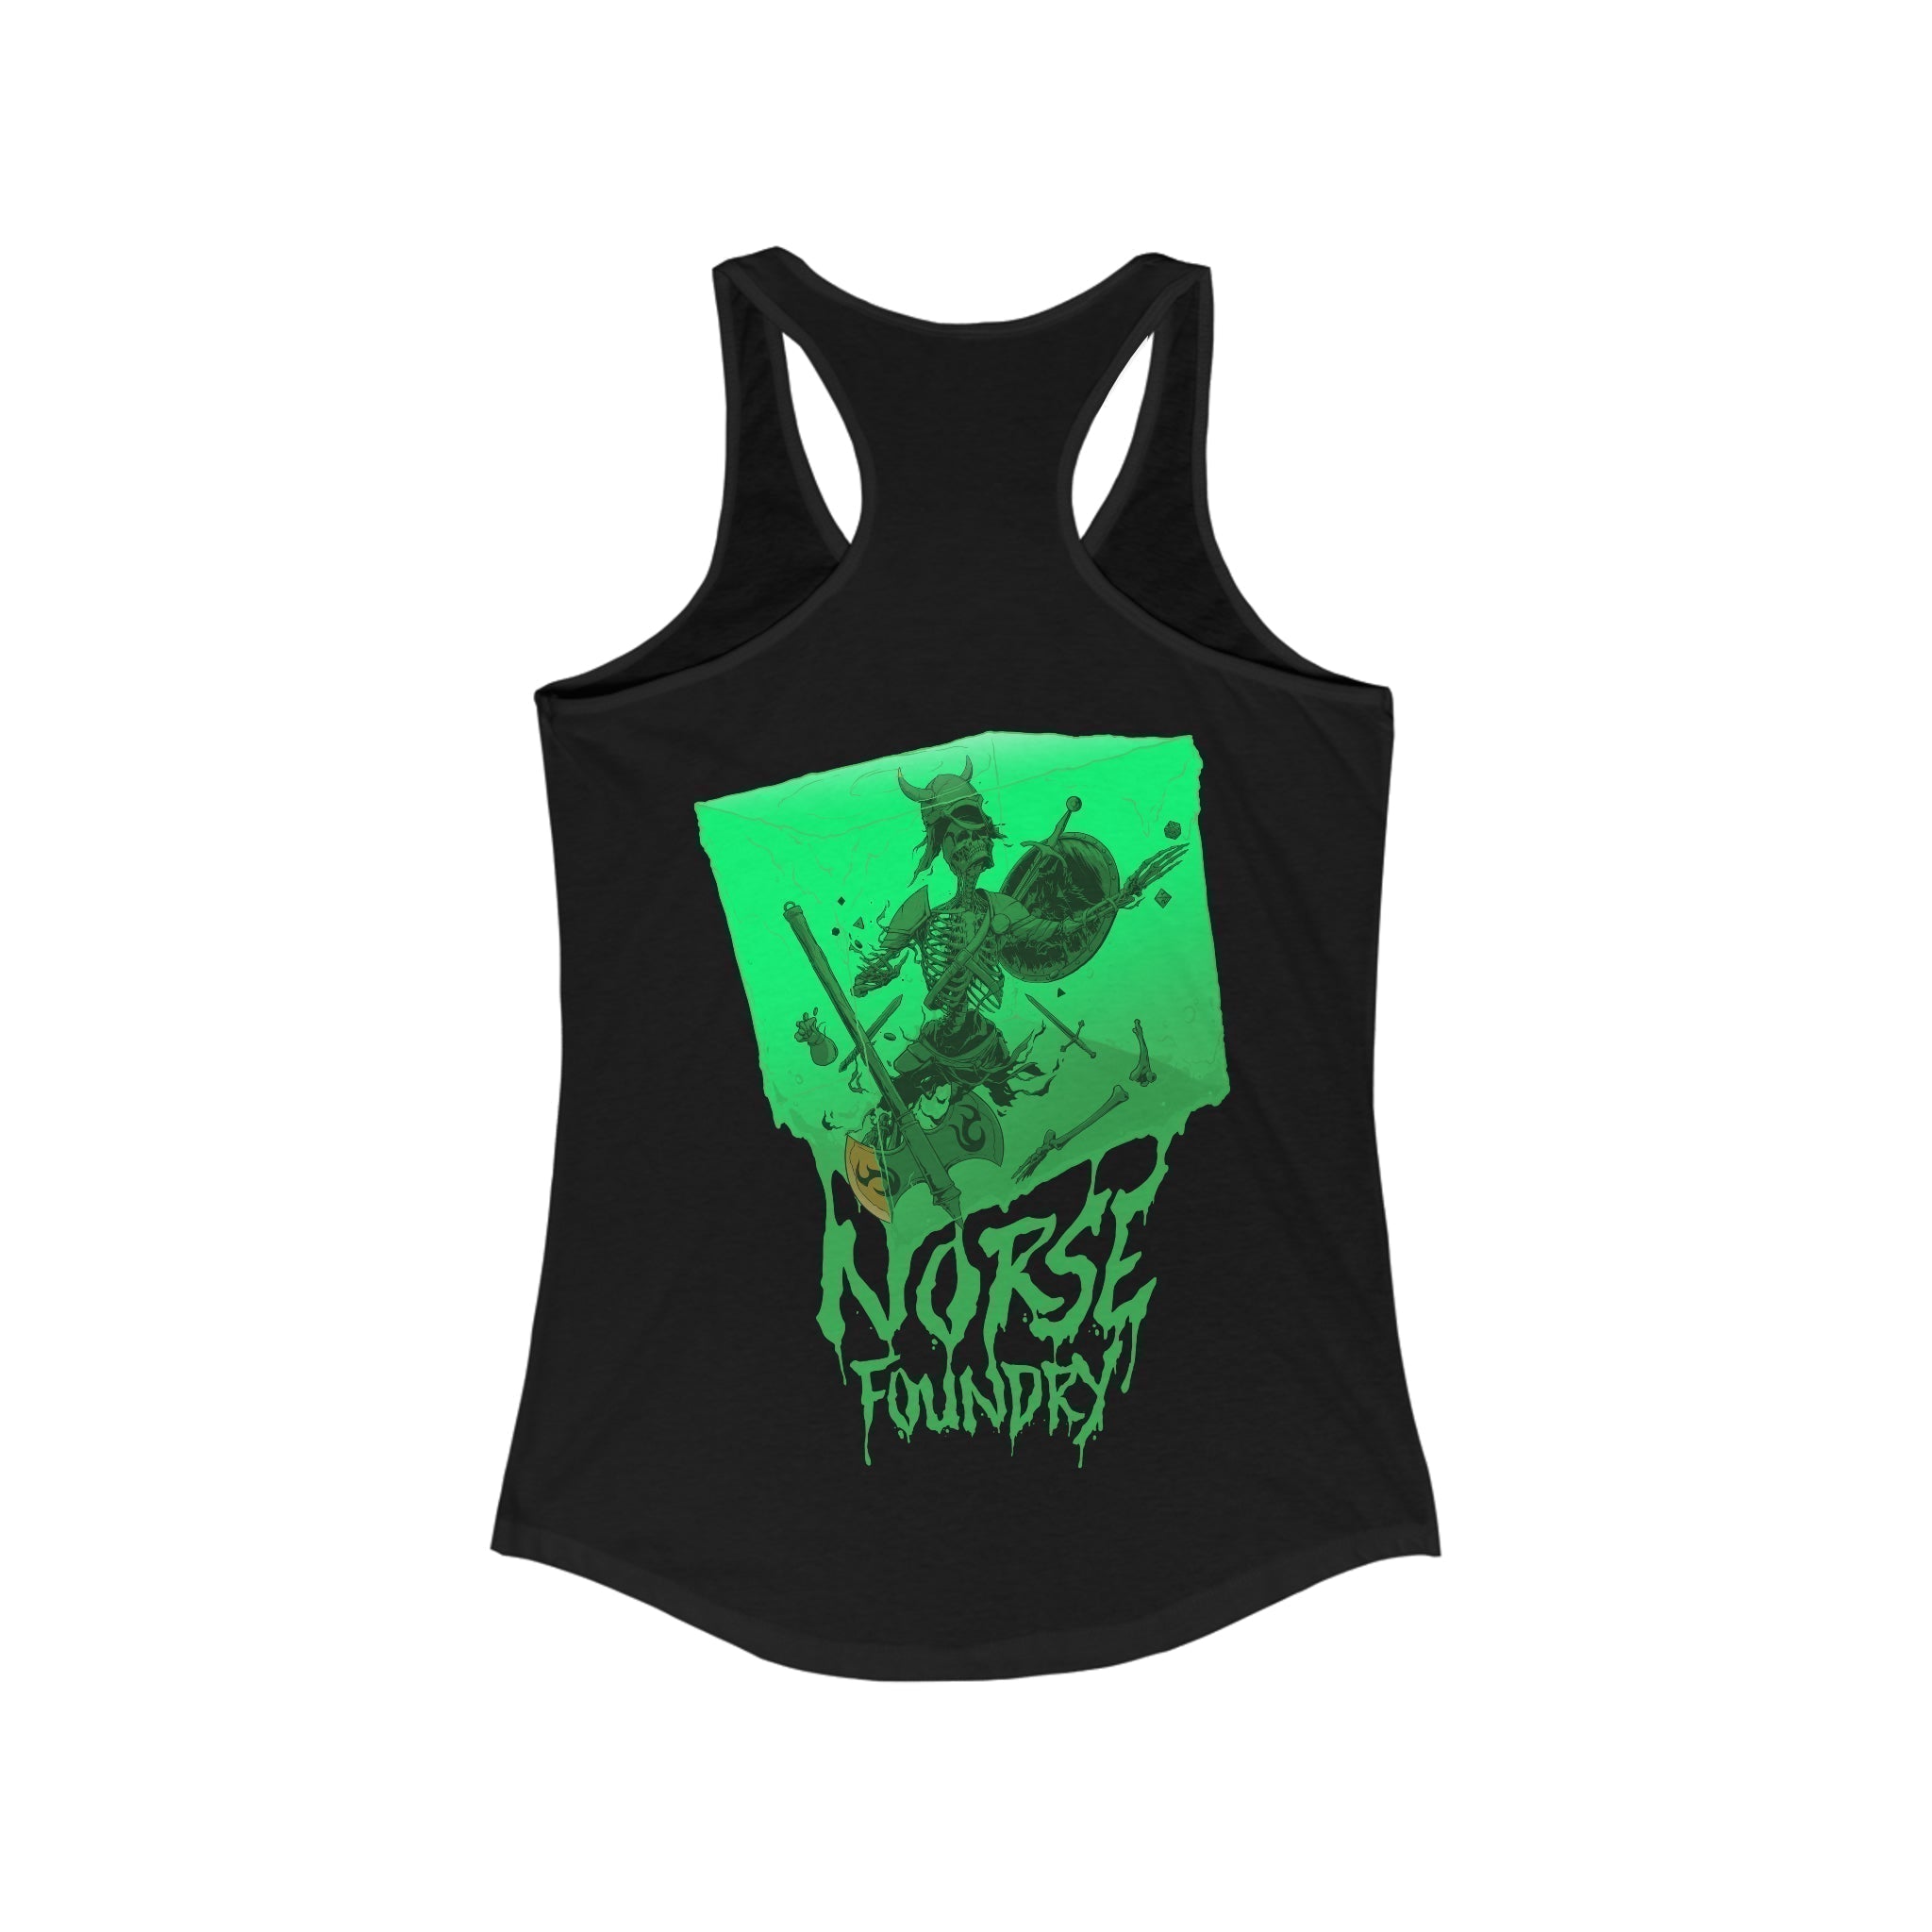 Cube - Norse Foundry Women's Tank Top - 14078618016925742219_Parent